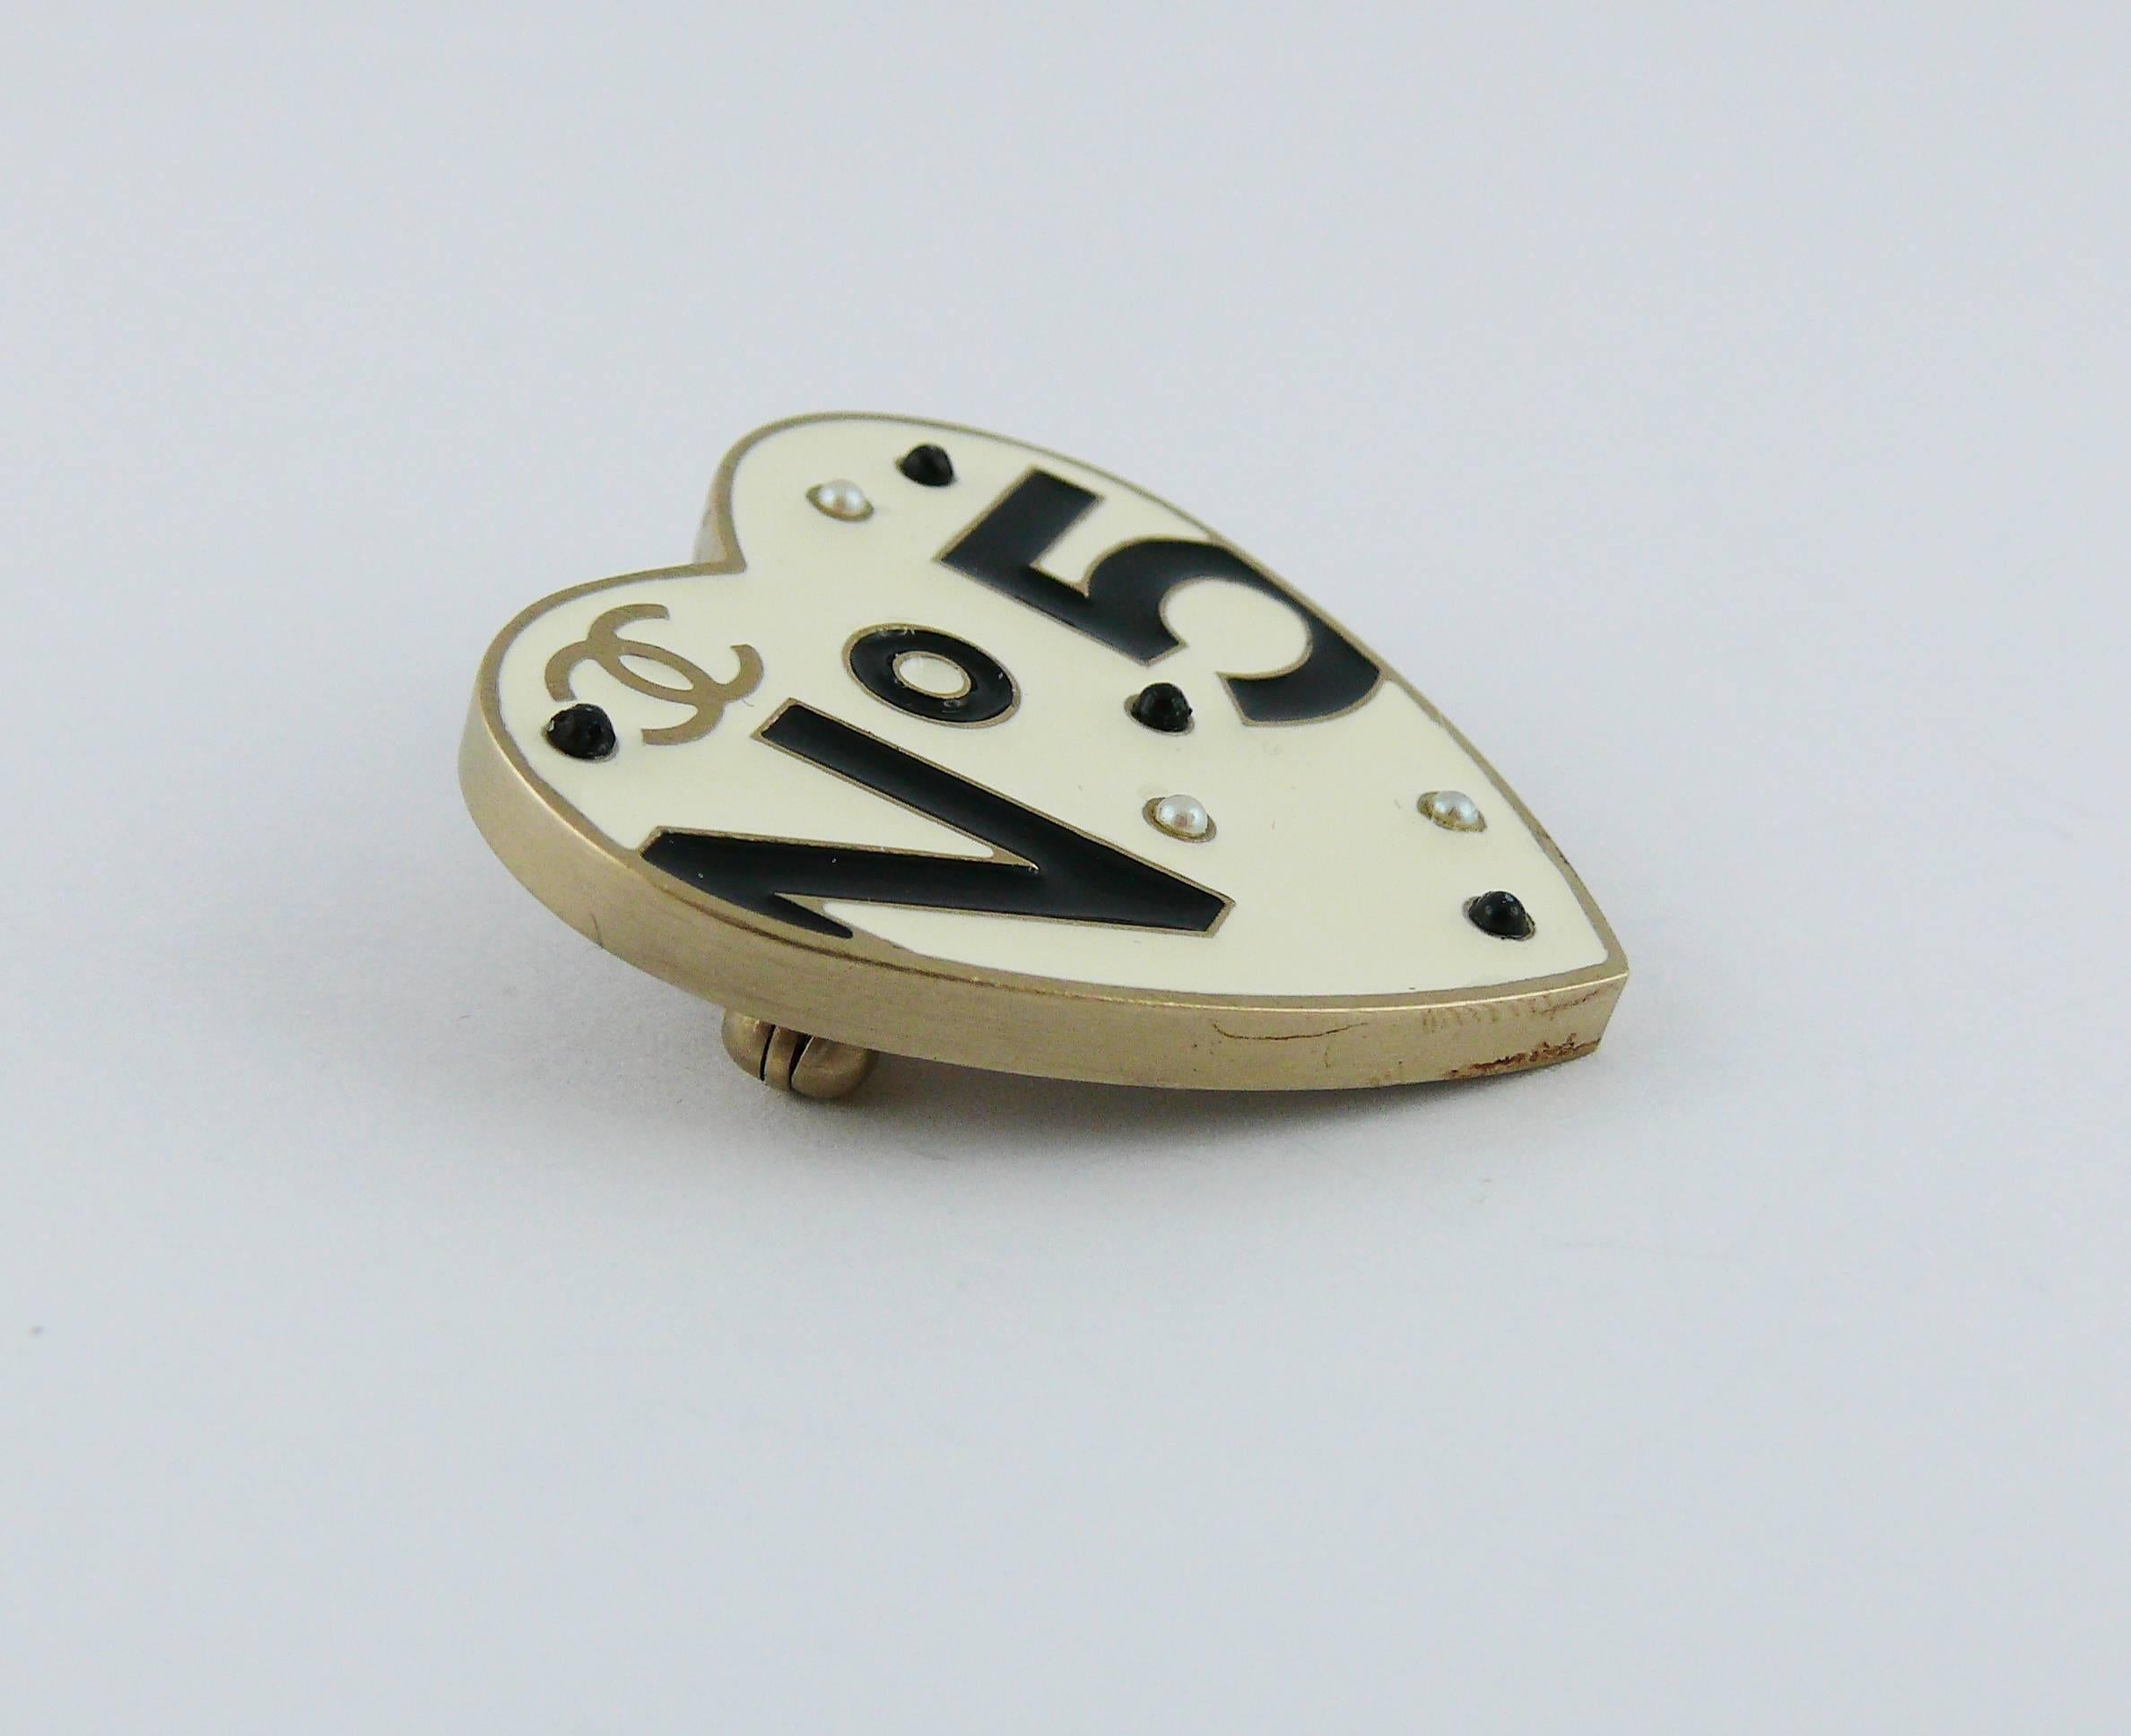 CHANEL No. 5 enamel heart brooch featuring interlocking CC monogram, faux pearls and black cabochons.

Spring/Summer 2006 Collection.

Can be worn as a pendant.

Marked CHANEL 06P Made in Italy.

Indicative measurements : max. length approx. 3.1 cm